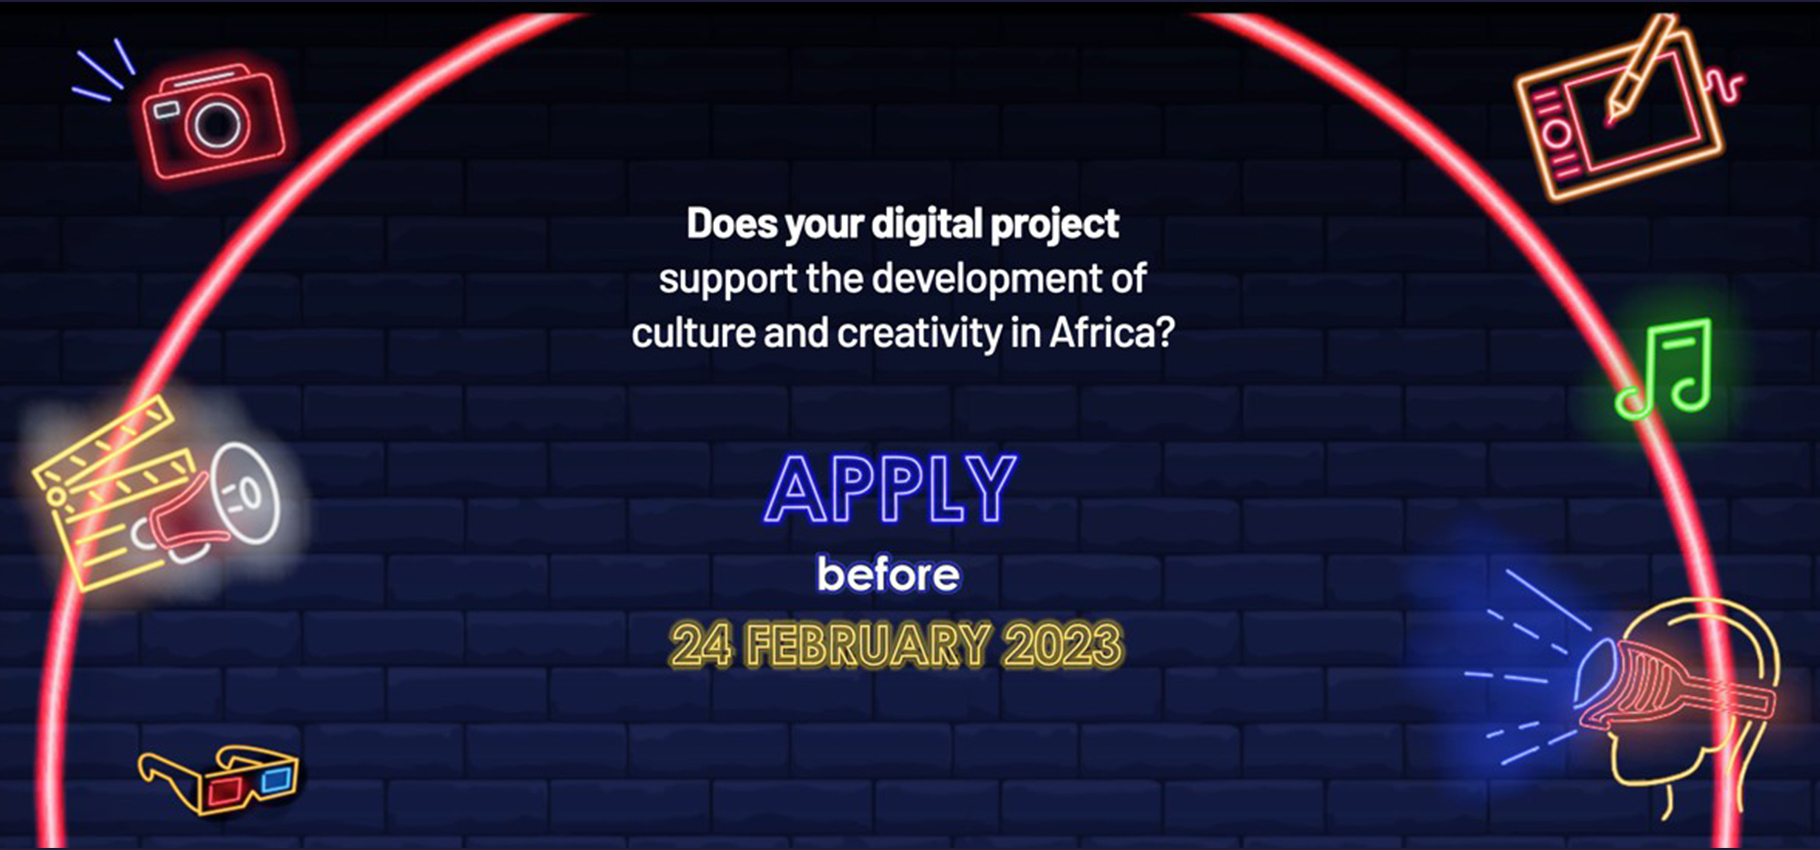 French Agency for Development (AFD) Digital Challenge 2023 for African Start-Ups (£150k Price)